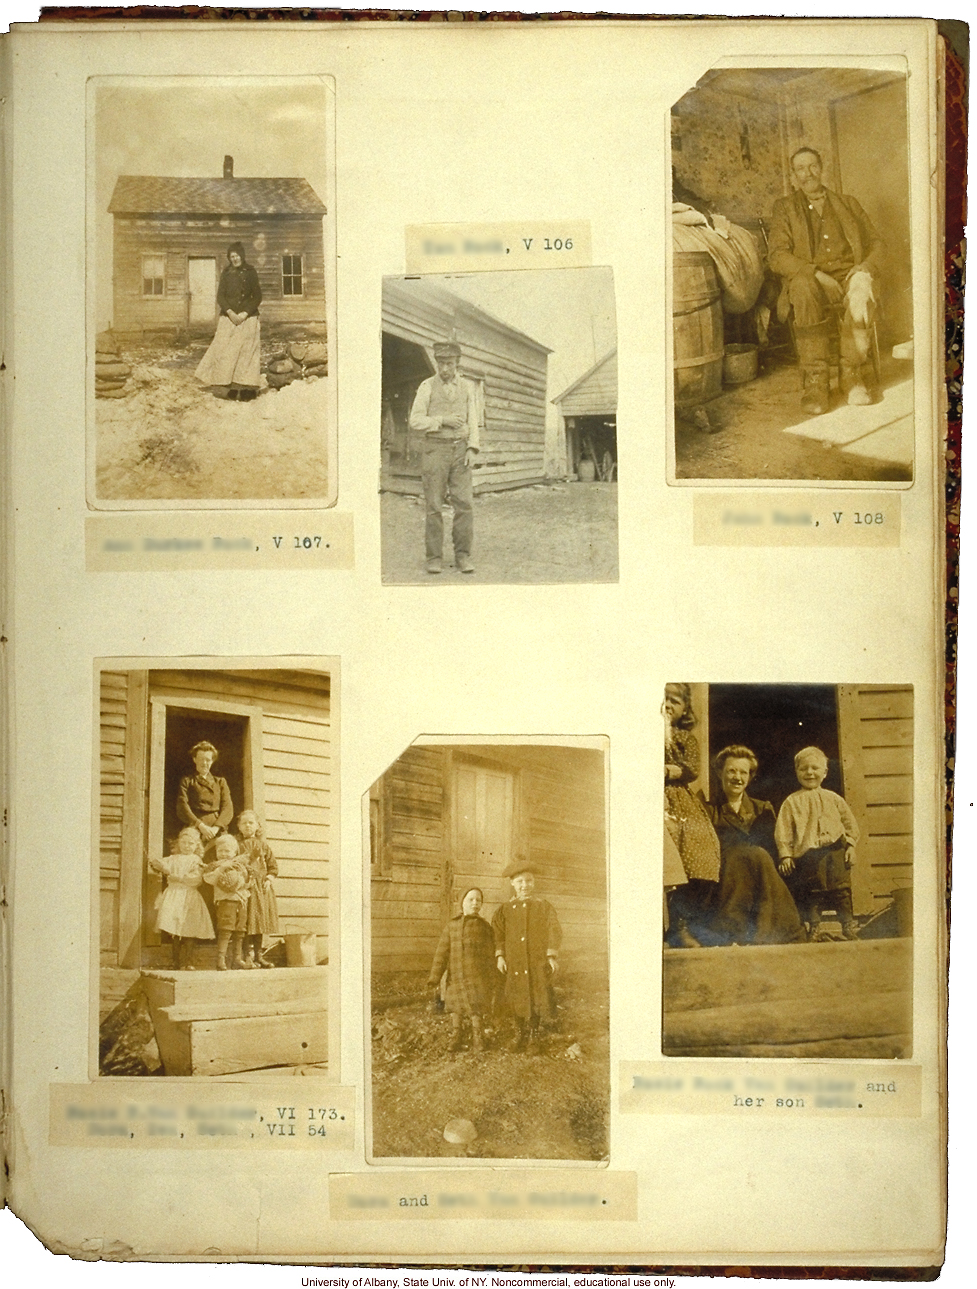 The Nam Family, by A. Estabrook and C. Davenport, pedigree of V106-V109 (p. 26) and corresponding field portraits from back of Estabrook's copy